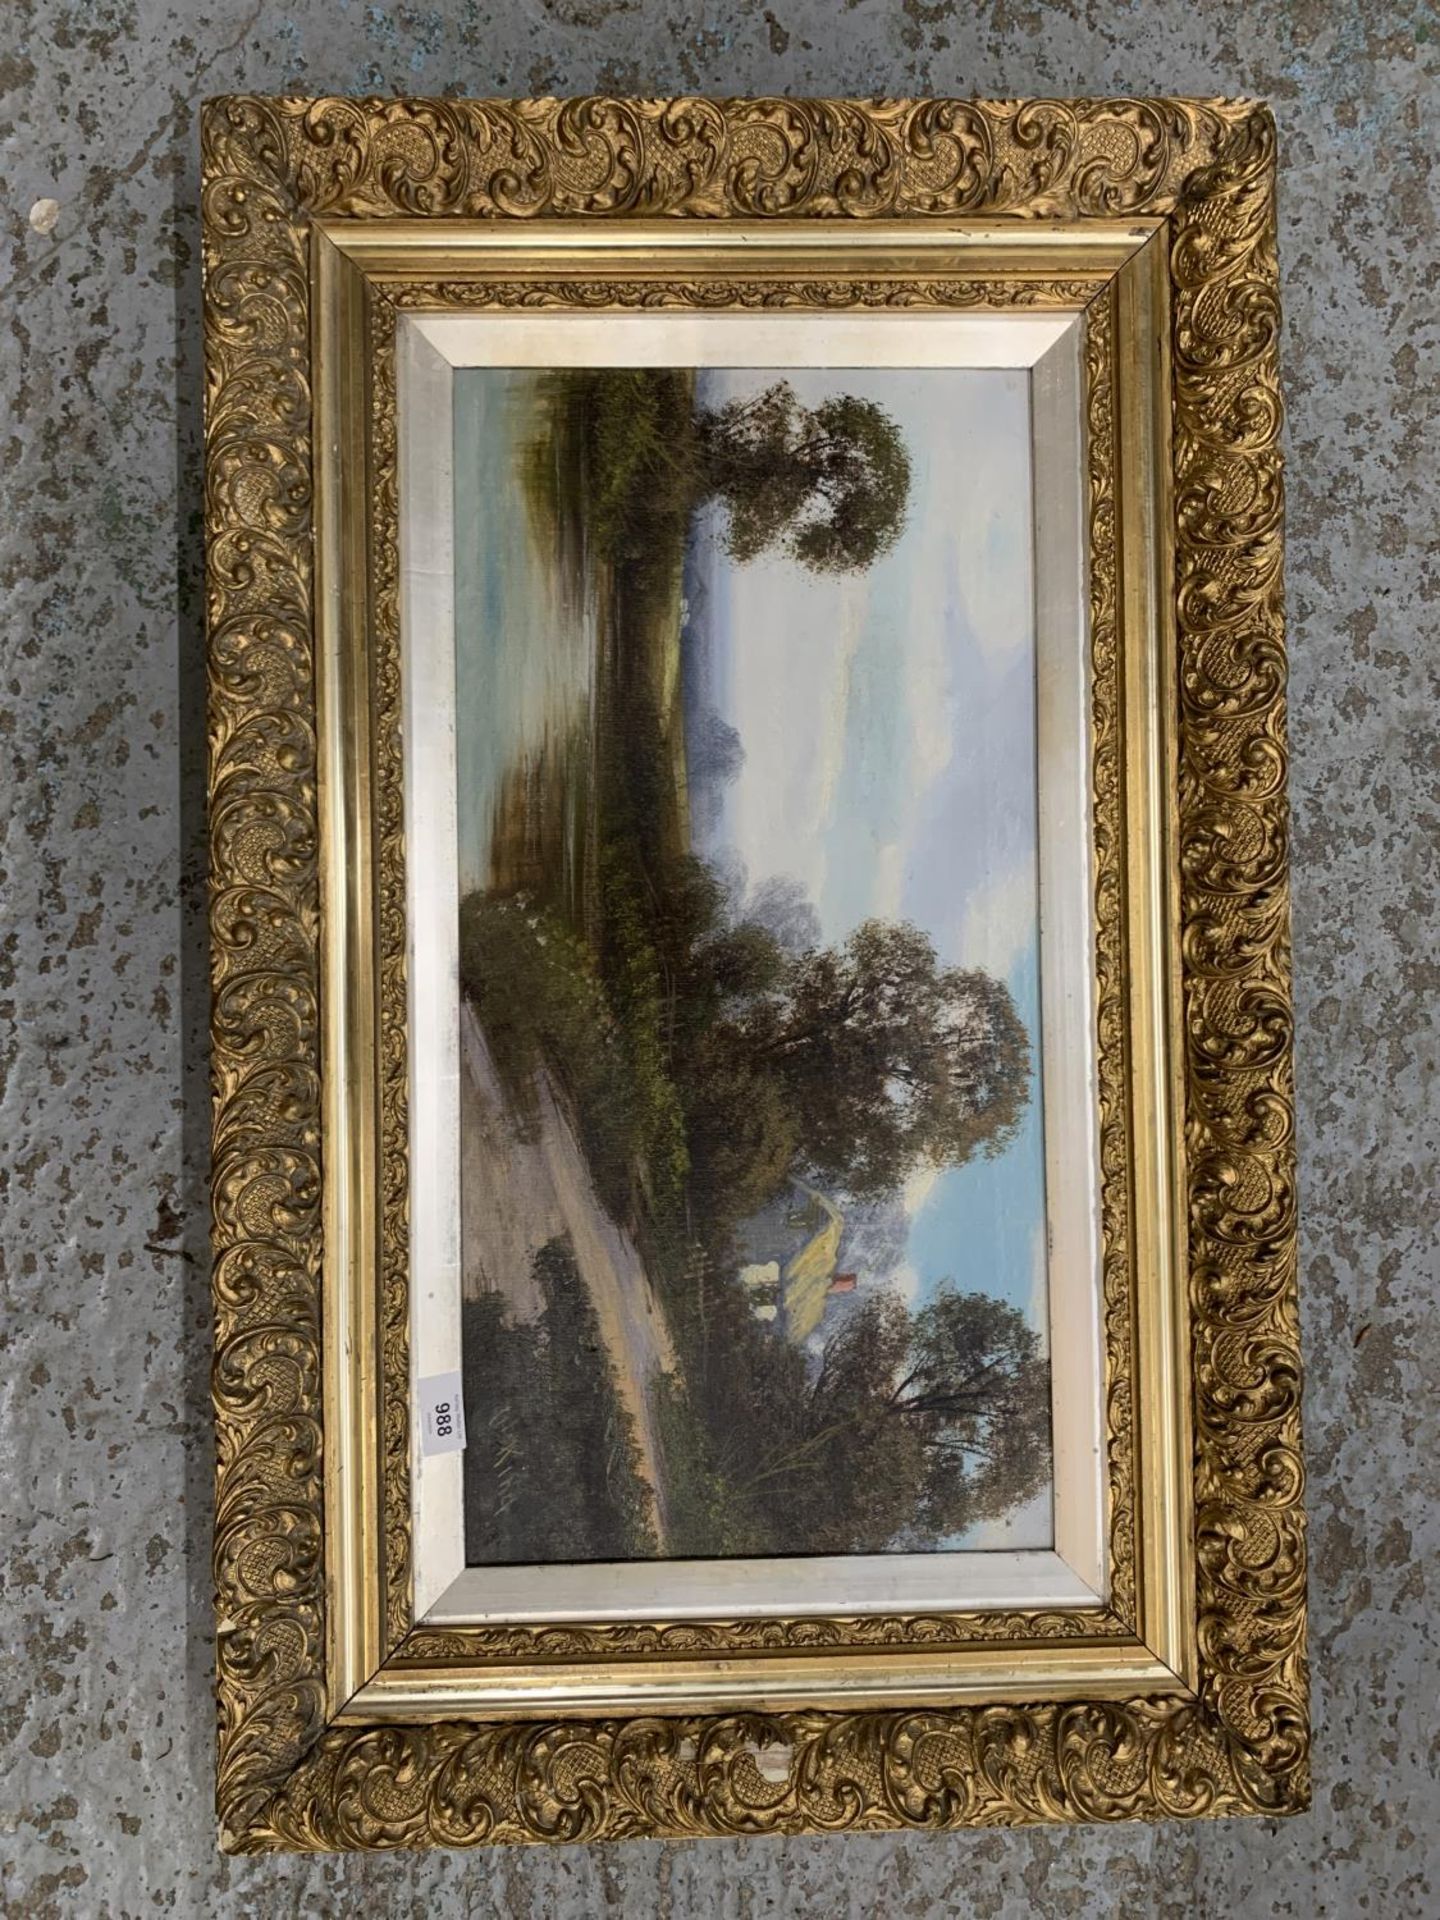 A FRAMED OIL ON CANVAS OF A COTTAGE AND RIVER SCENE, SIGNED KING, IN A GILT FRAME, 80CM X 50CM